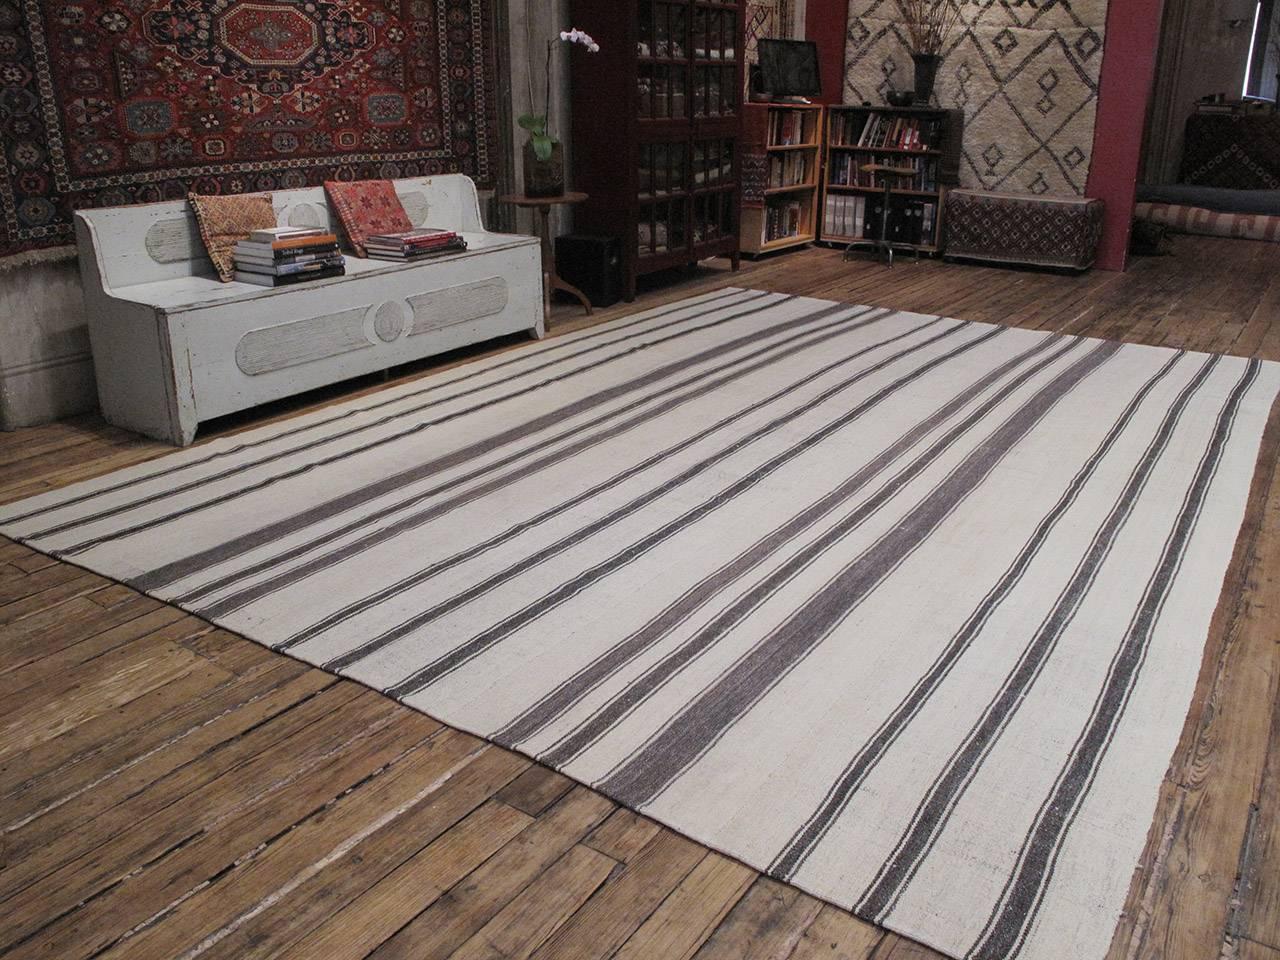 An old tribal flat-weave of large proportions from Central Turkey, woven entirely with wool in natural tones of ivory and dark brown/gray in alternating stripes. The wool quality is superb and the weave is very tight and heavy, creating a very